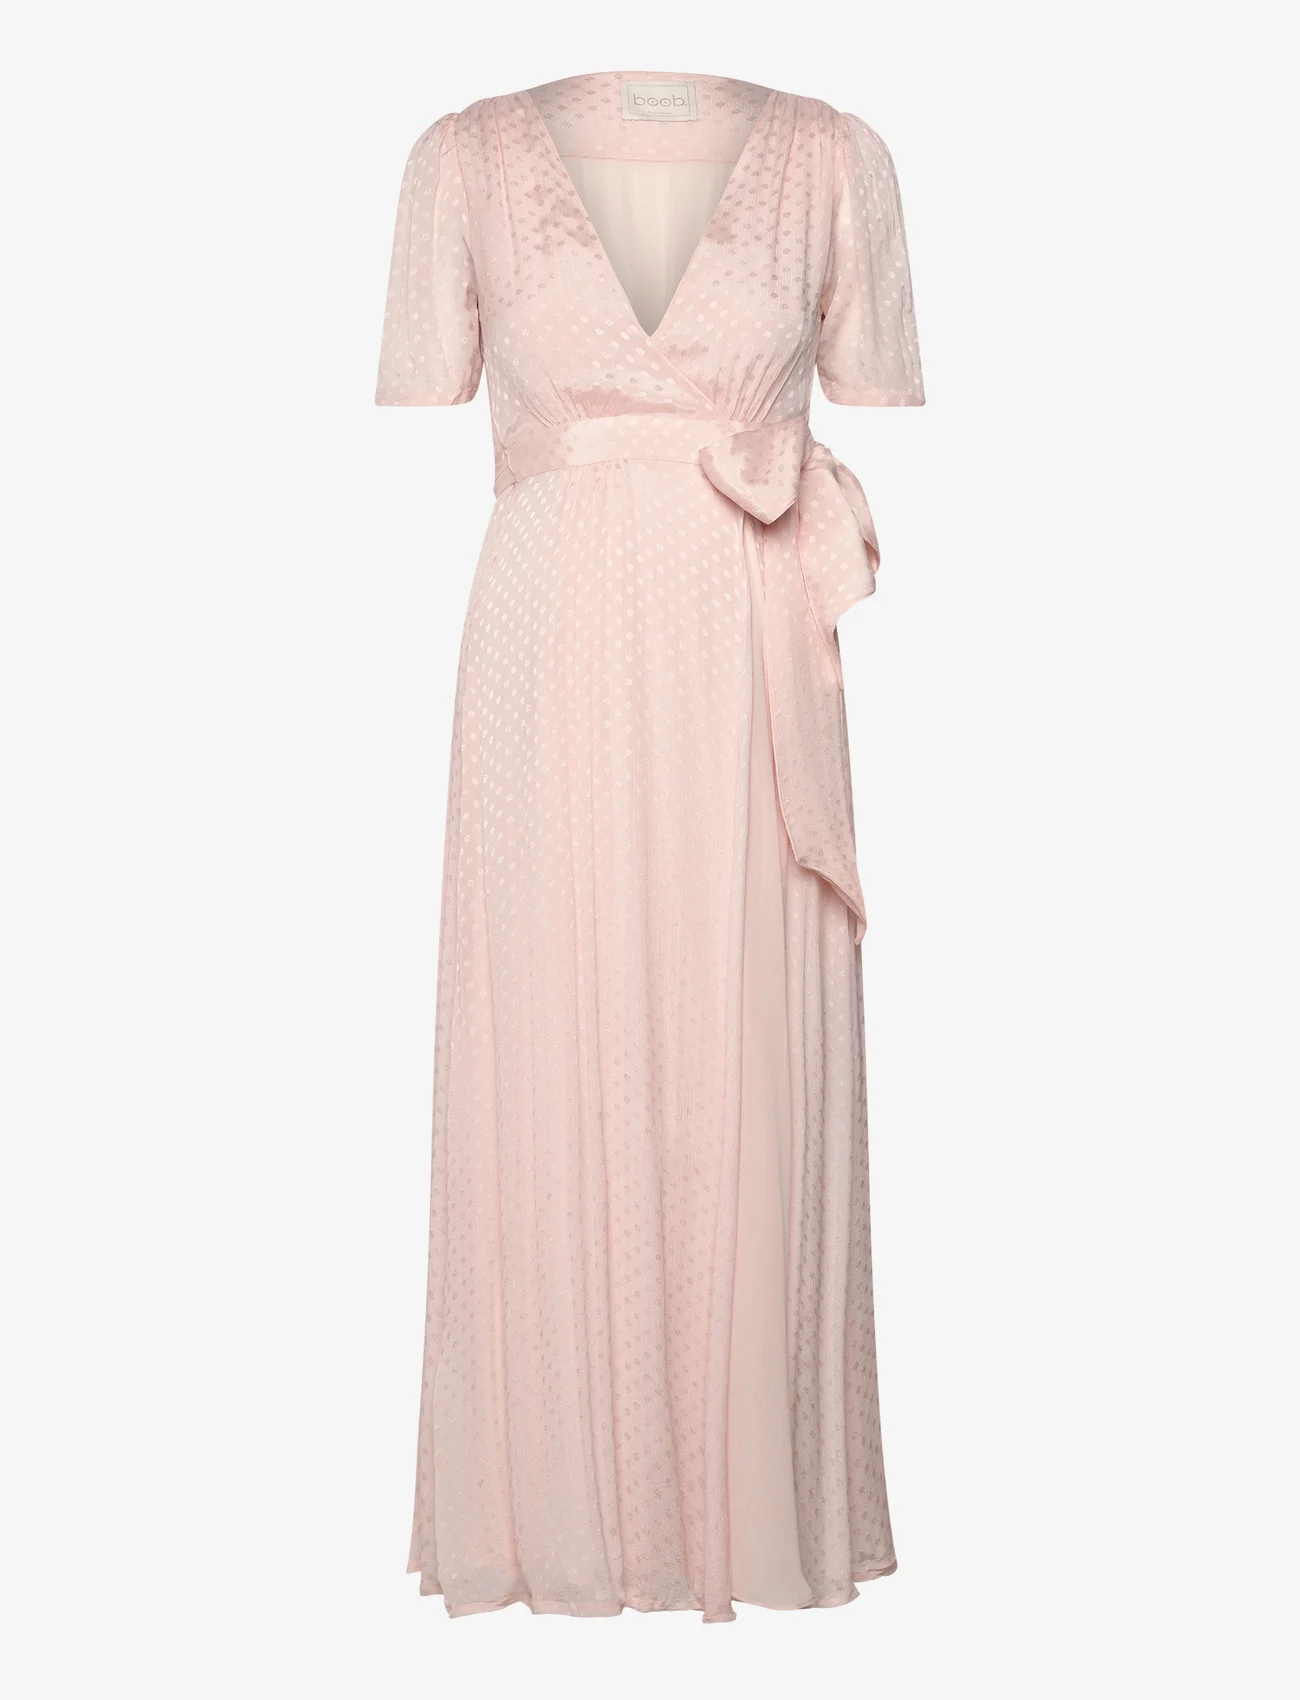 Boob - Occasion dress - wrap dresses - pink champagne - 1